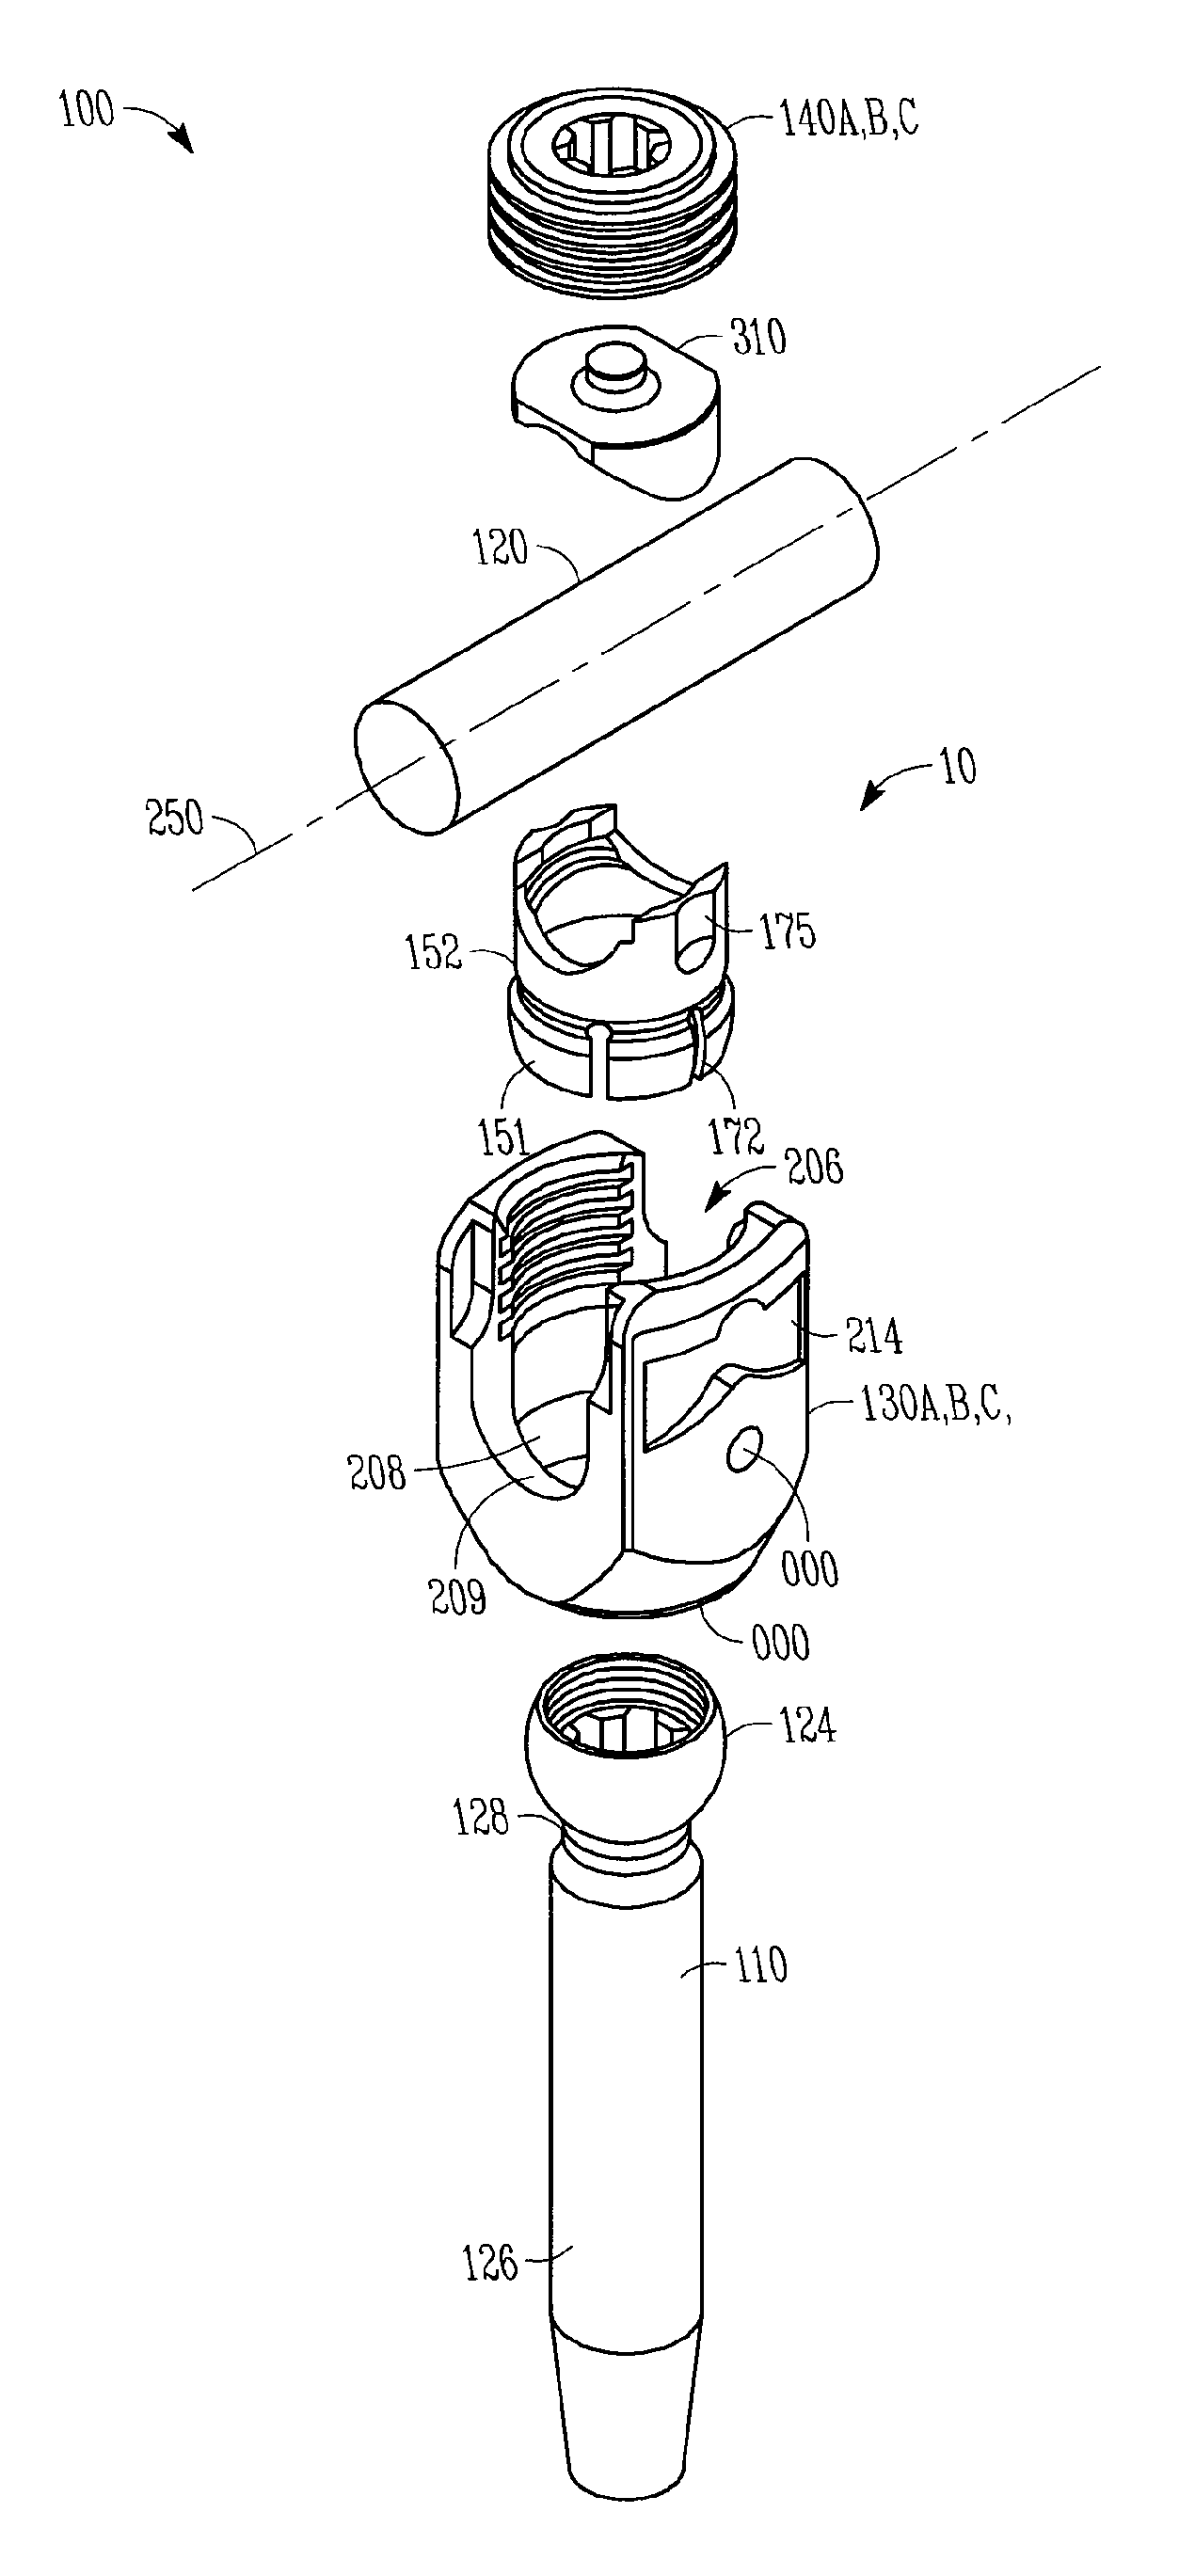 Variable offset spine fixation system and method